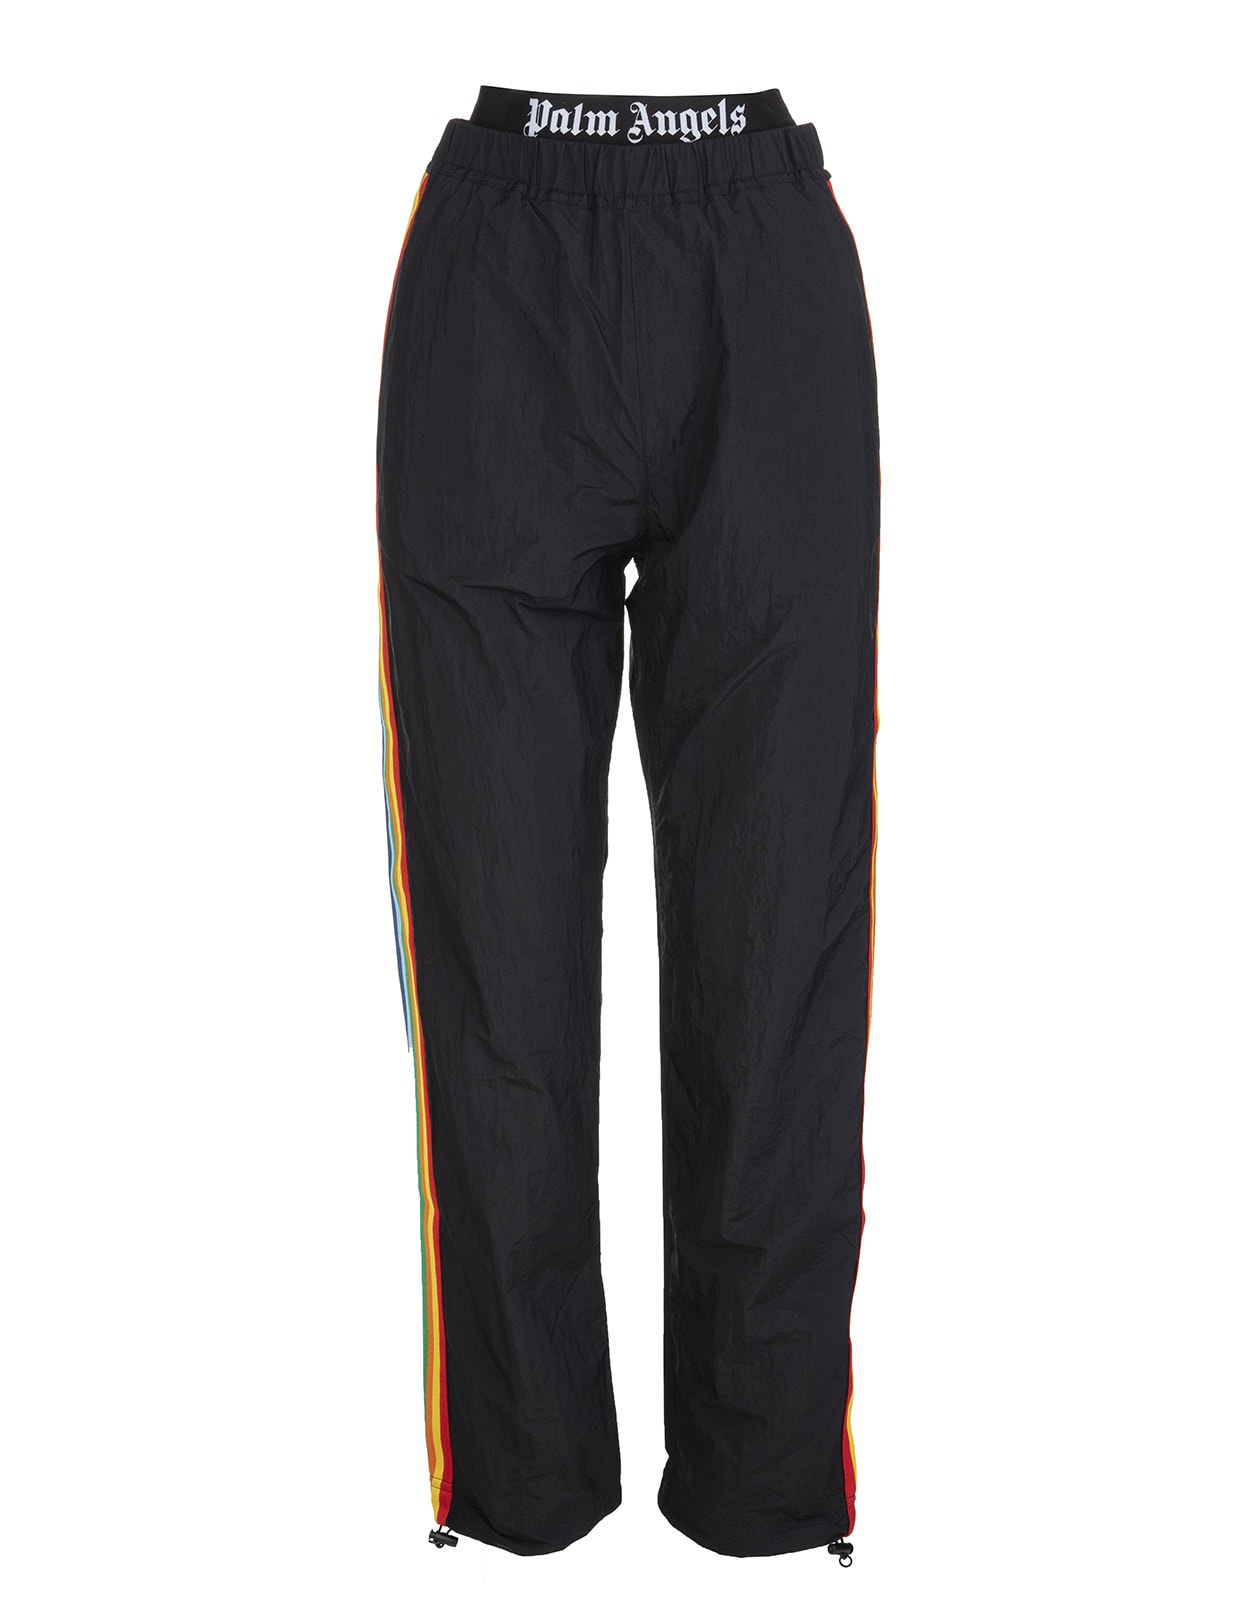 Palm Angels Woman Black Joggers With Logoed Waist And Multicolored Side Bands